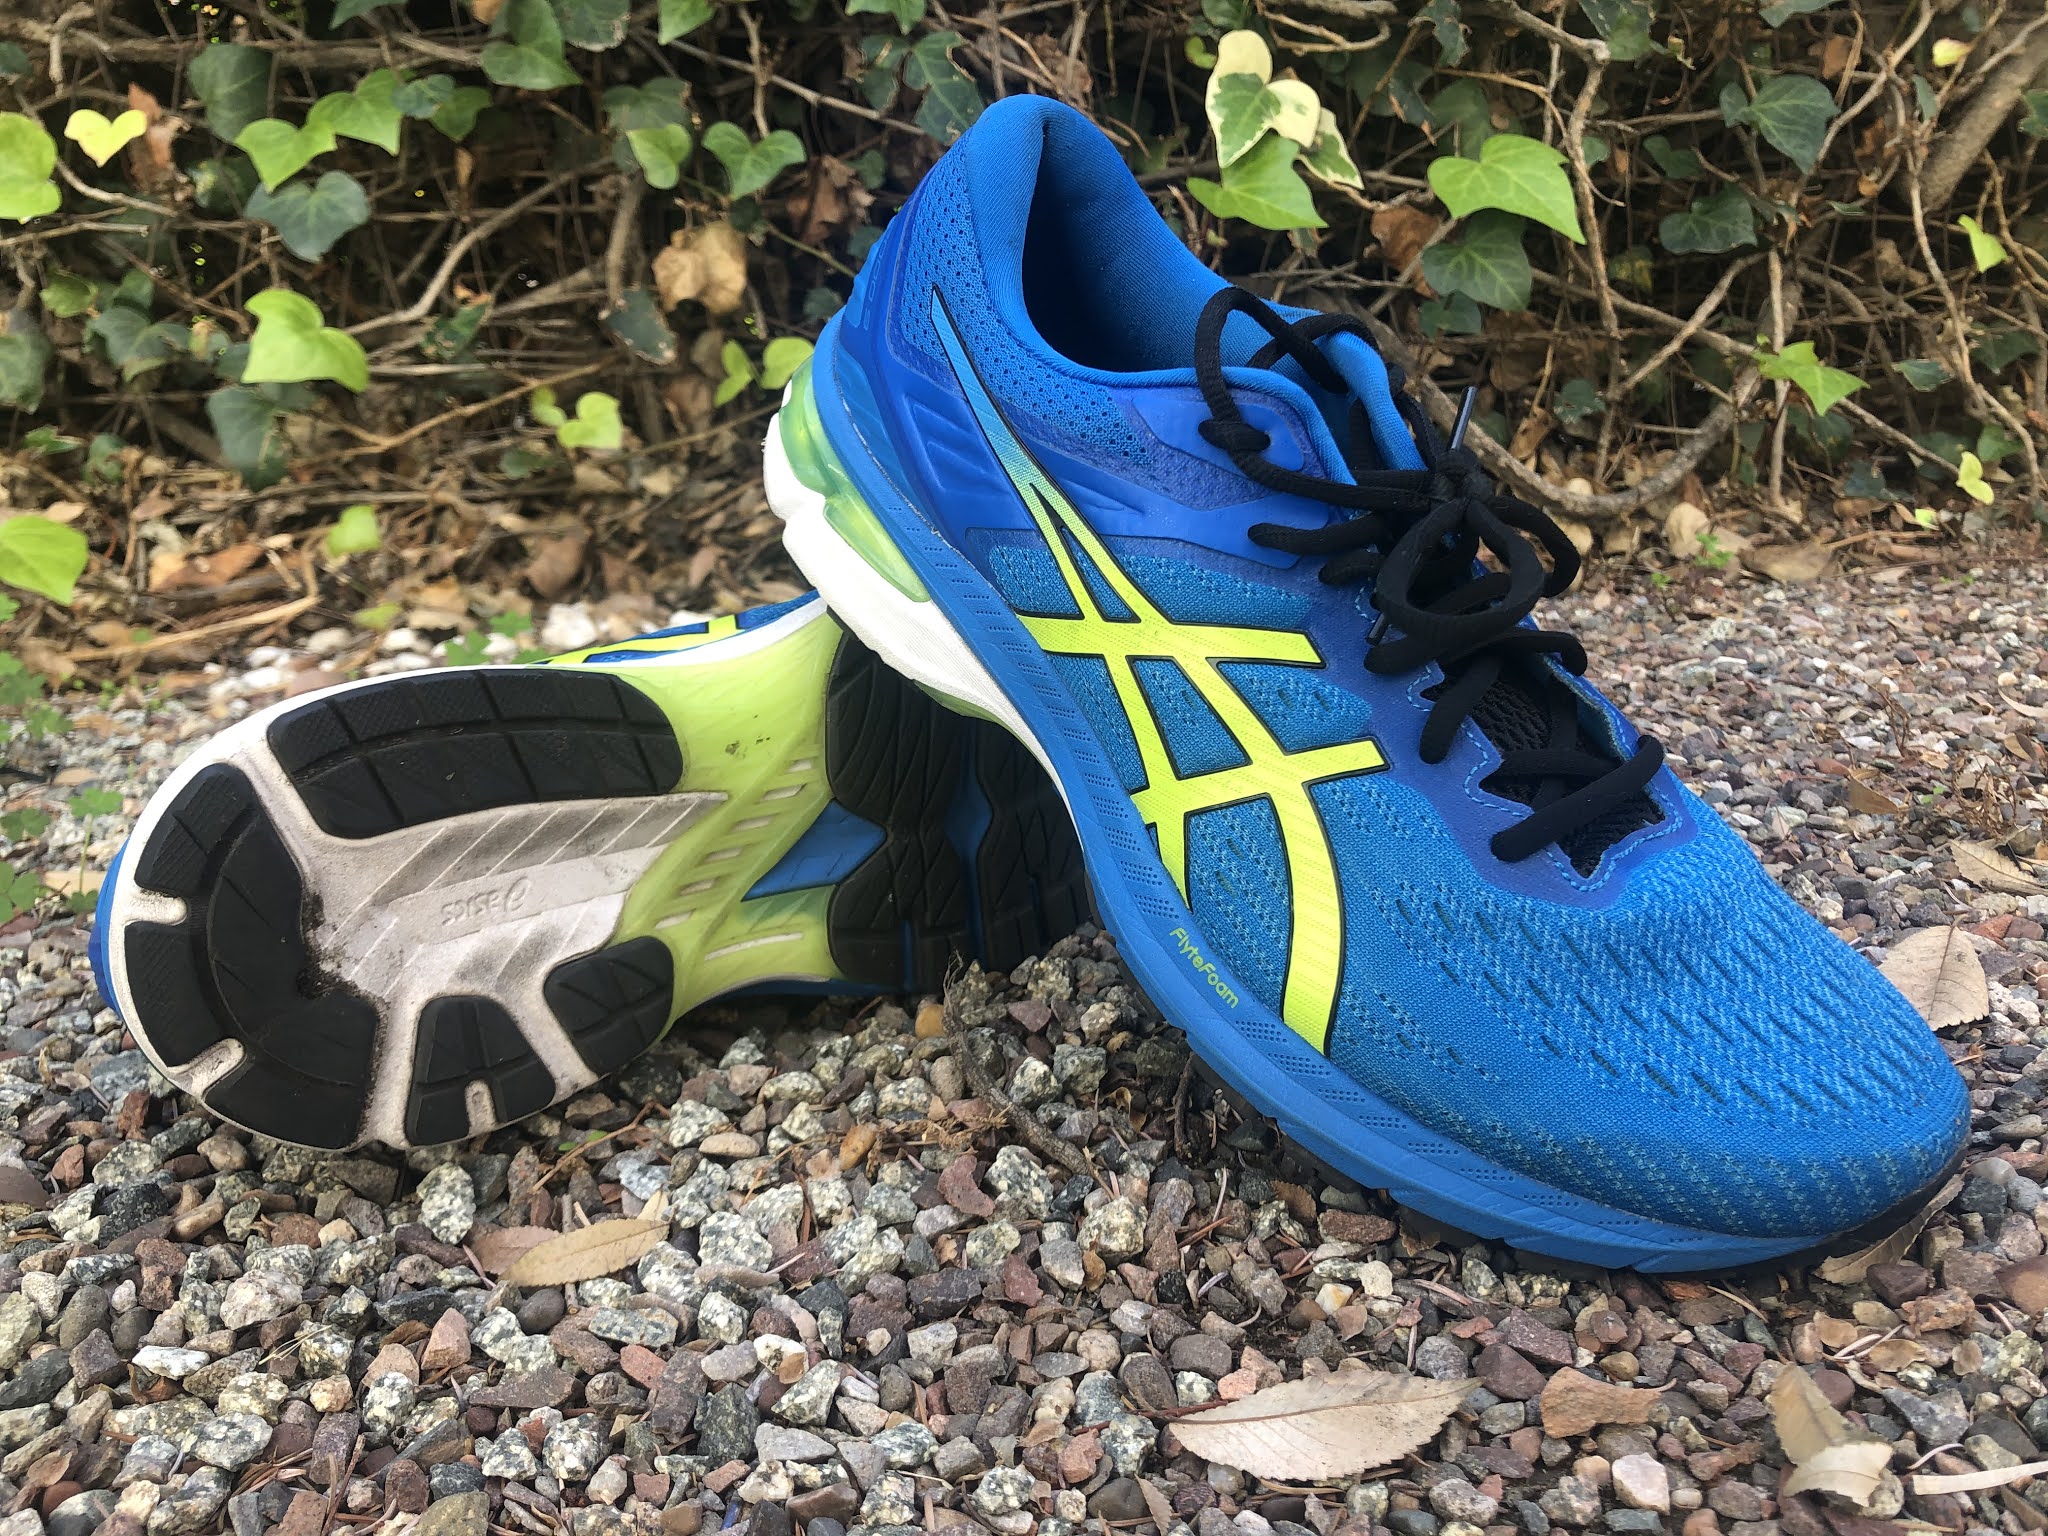 Asics GT 2000 9 Review - DOCTORS OF RUNNING